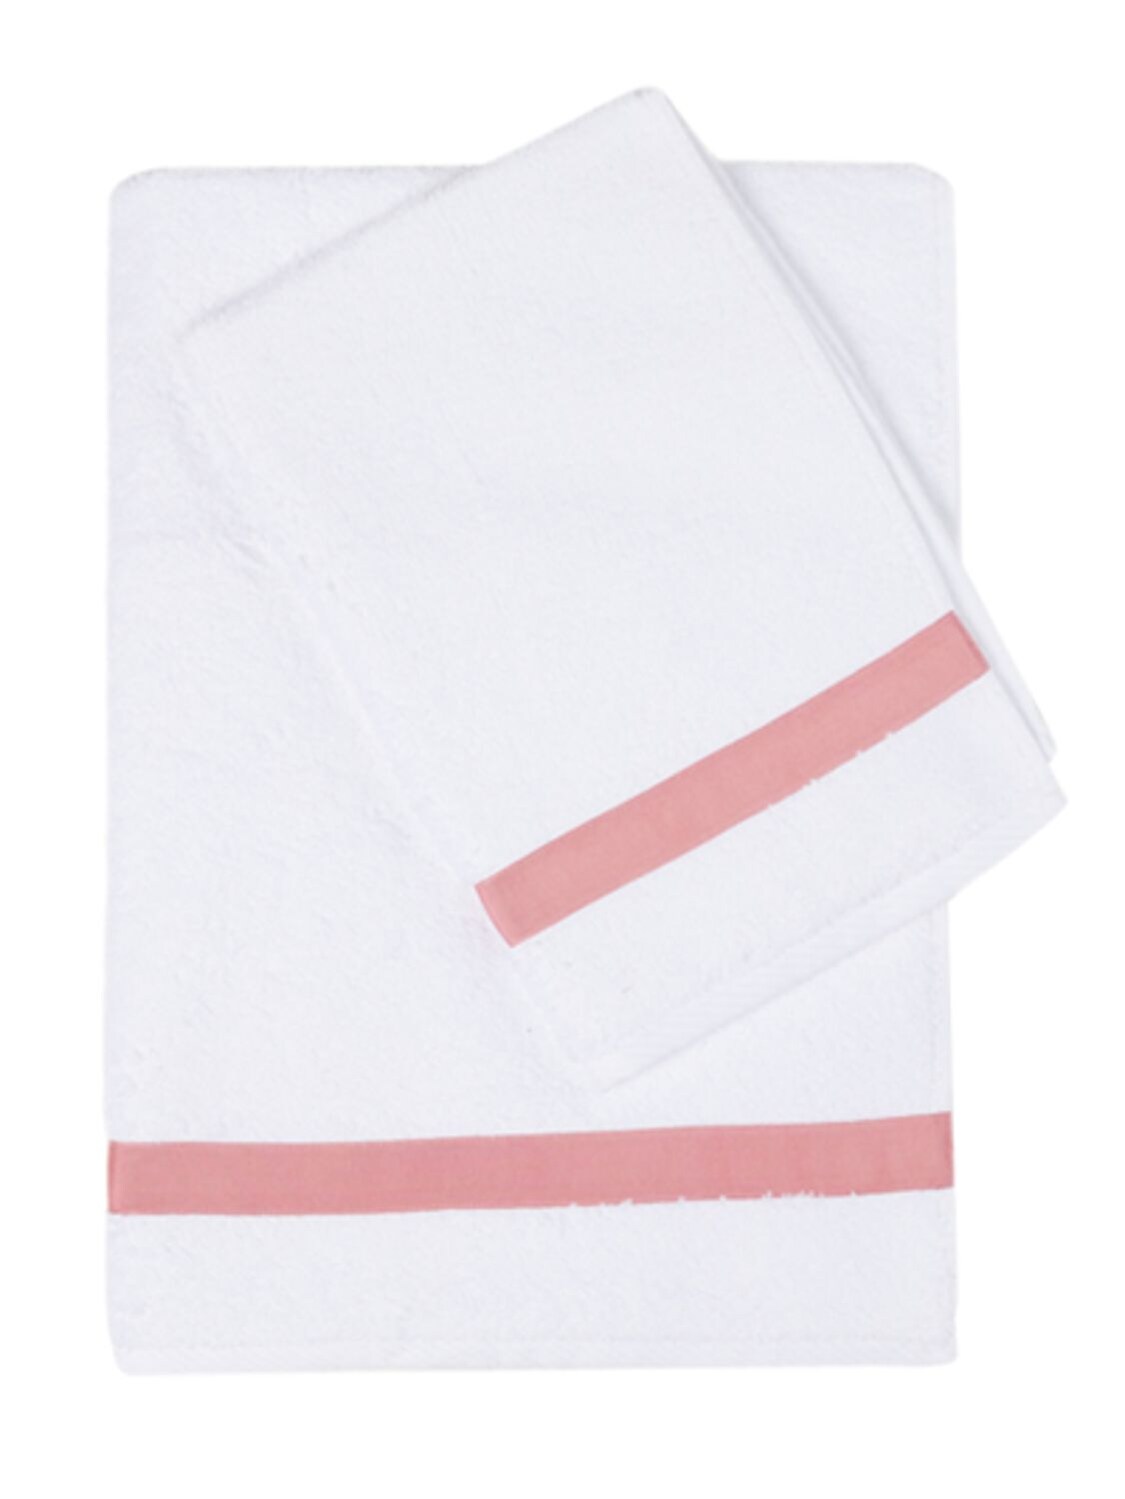 Alessandro Di Marco Set Of 2 Cotton Terrycloth Towels In White